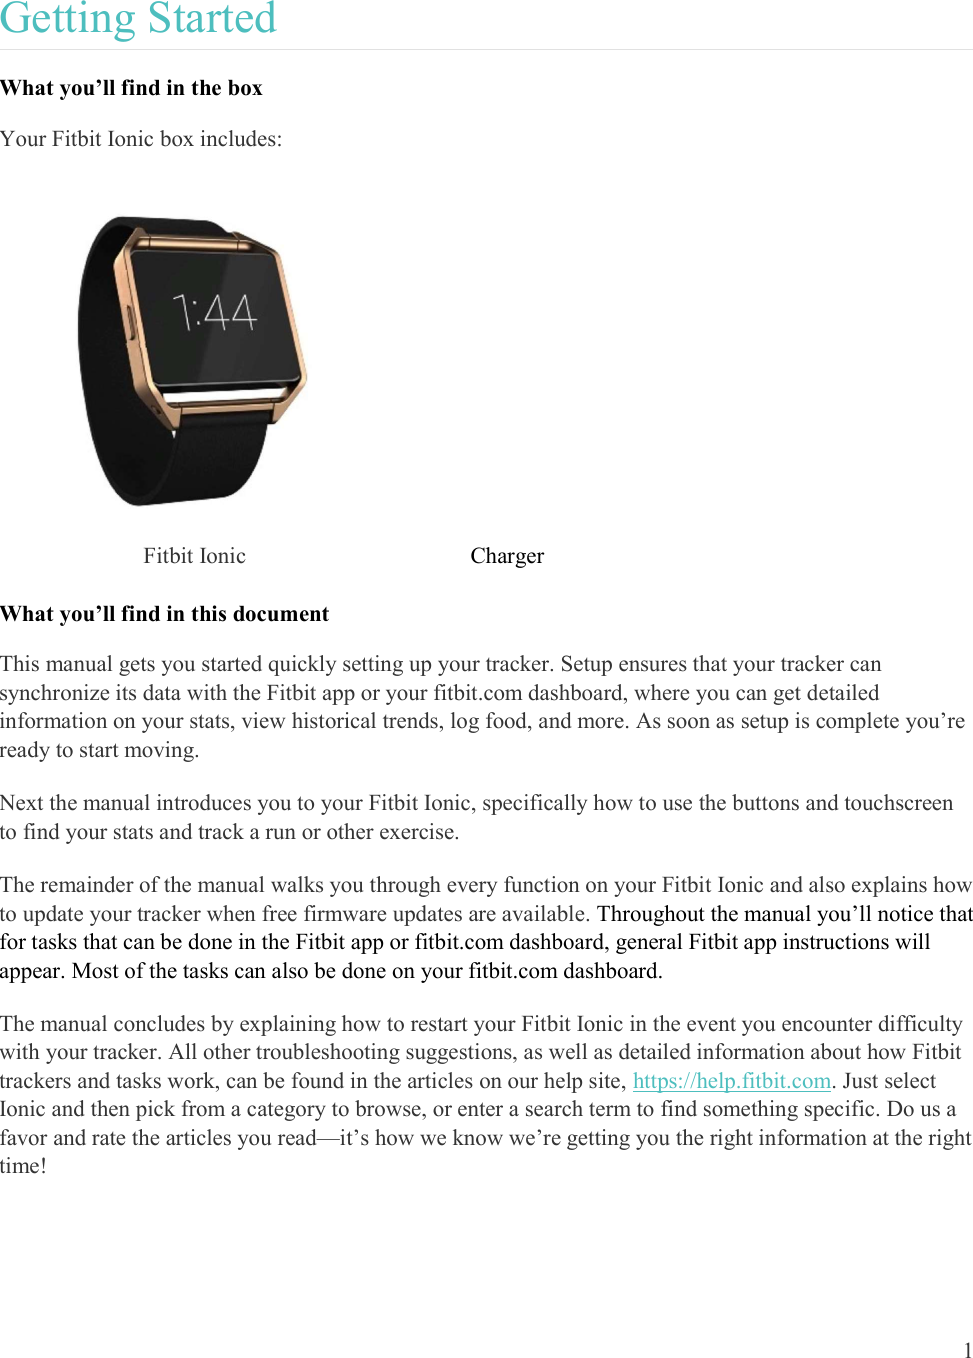  1  Getting Started What you’ll find in the box Your Fitbit Ionic box includes:  Fitbit Ionic                                 Charger   What you’ll find in this document This manual gets you started quickly setting up your tracker. Setup ensures that your tracker can synchronize its data with the Fitbit app or your fitbit.com dashboard, where you can get detailed information on your stats, view historical trends, log food, and more. As soon as setup is complete you’re ready to start moving.  Next the manual introduces you to your Fitbit Ionic, specifically how to use the buttons and touchscreen to find your stats and track a run or other exercise.  The remainder of the manual walks you through every function on your Fitbit Ionic and also explains how to update your tracker when free firmware updates are available. Throughout the manual you’ll notice that for tasks that can be done in the Fitbit app or fitbit.com dashboard, general Fitbit app instructions will appear. Most of the tasks can also be done on your fitbit.com dashboard.  The manual concludes by explaining how to restart your Fitbit Ionic in the event you encounter difficulty with your tracker. All other troubleshooting suggestions, as well as detailed information about how Fitbit trackers and tasks work, can be found in the articles on our help site, https://help.fitbit.com. Just select Ionic and then pick from a category to browse, or enter a search term to find something specific. Do us a favor and rate the articles you read—it’s how we know we’re getting you the right information at the right time!  